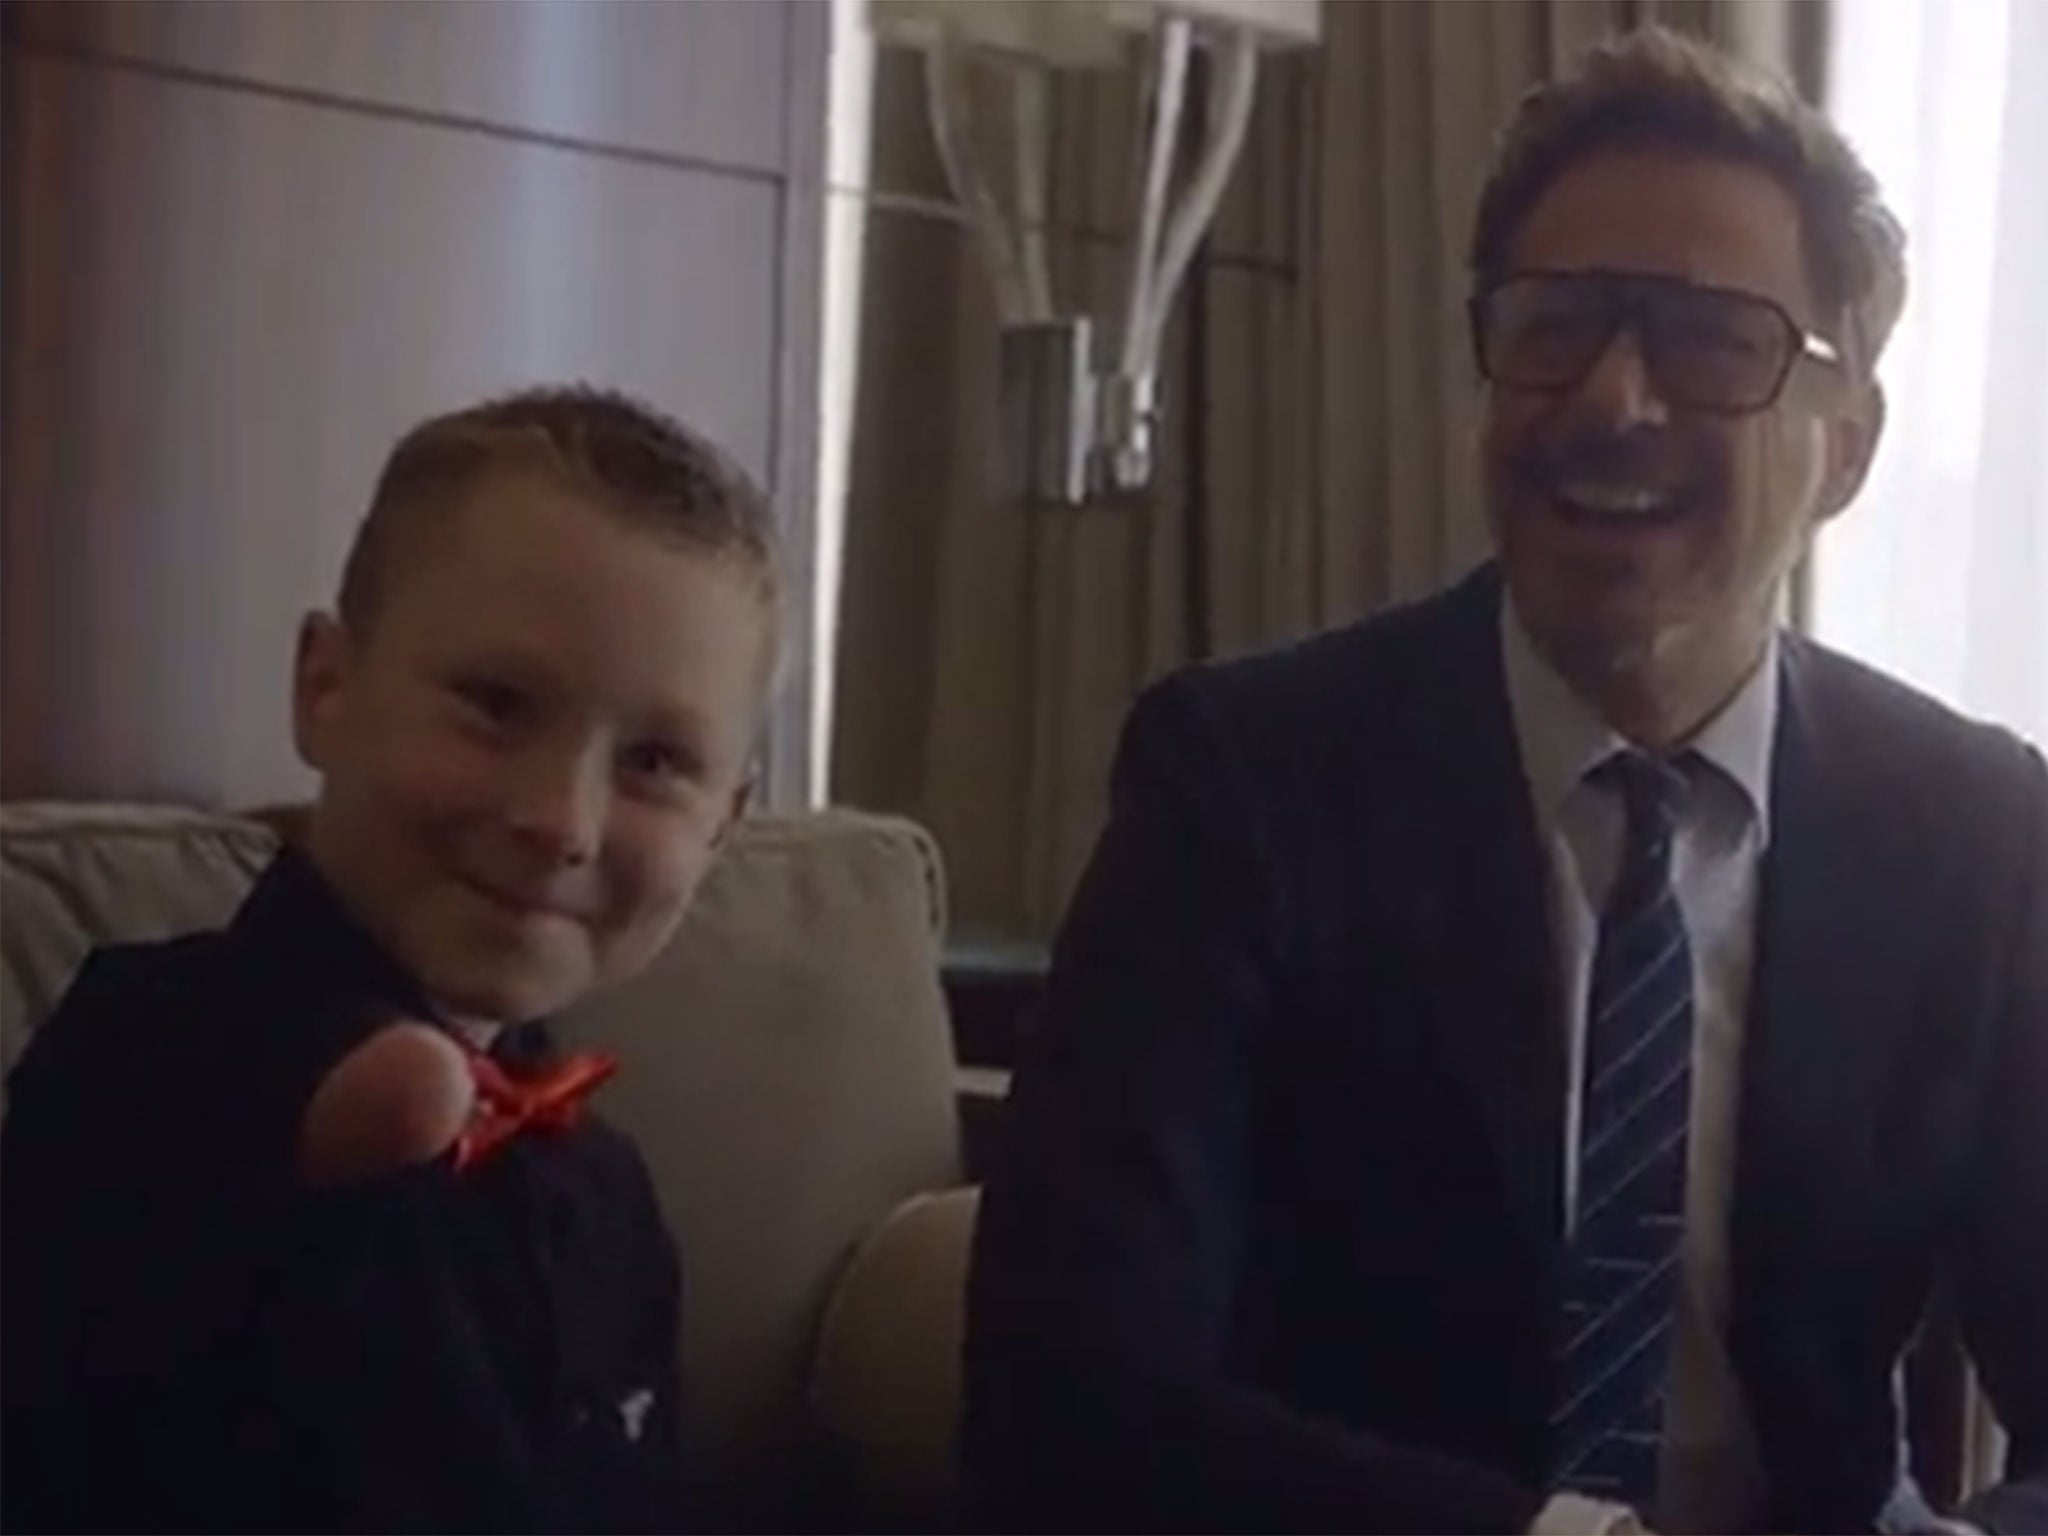 Robert Downey Jr. and Albert Manero, a #CollectiveProject student who founded Limbitless, surprised a very Alex with a new bionic 3D printed arm.